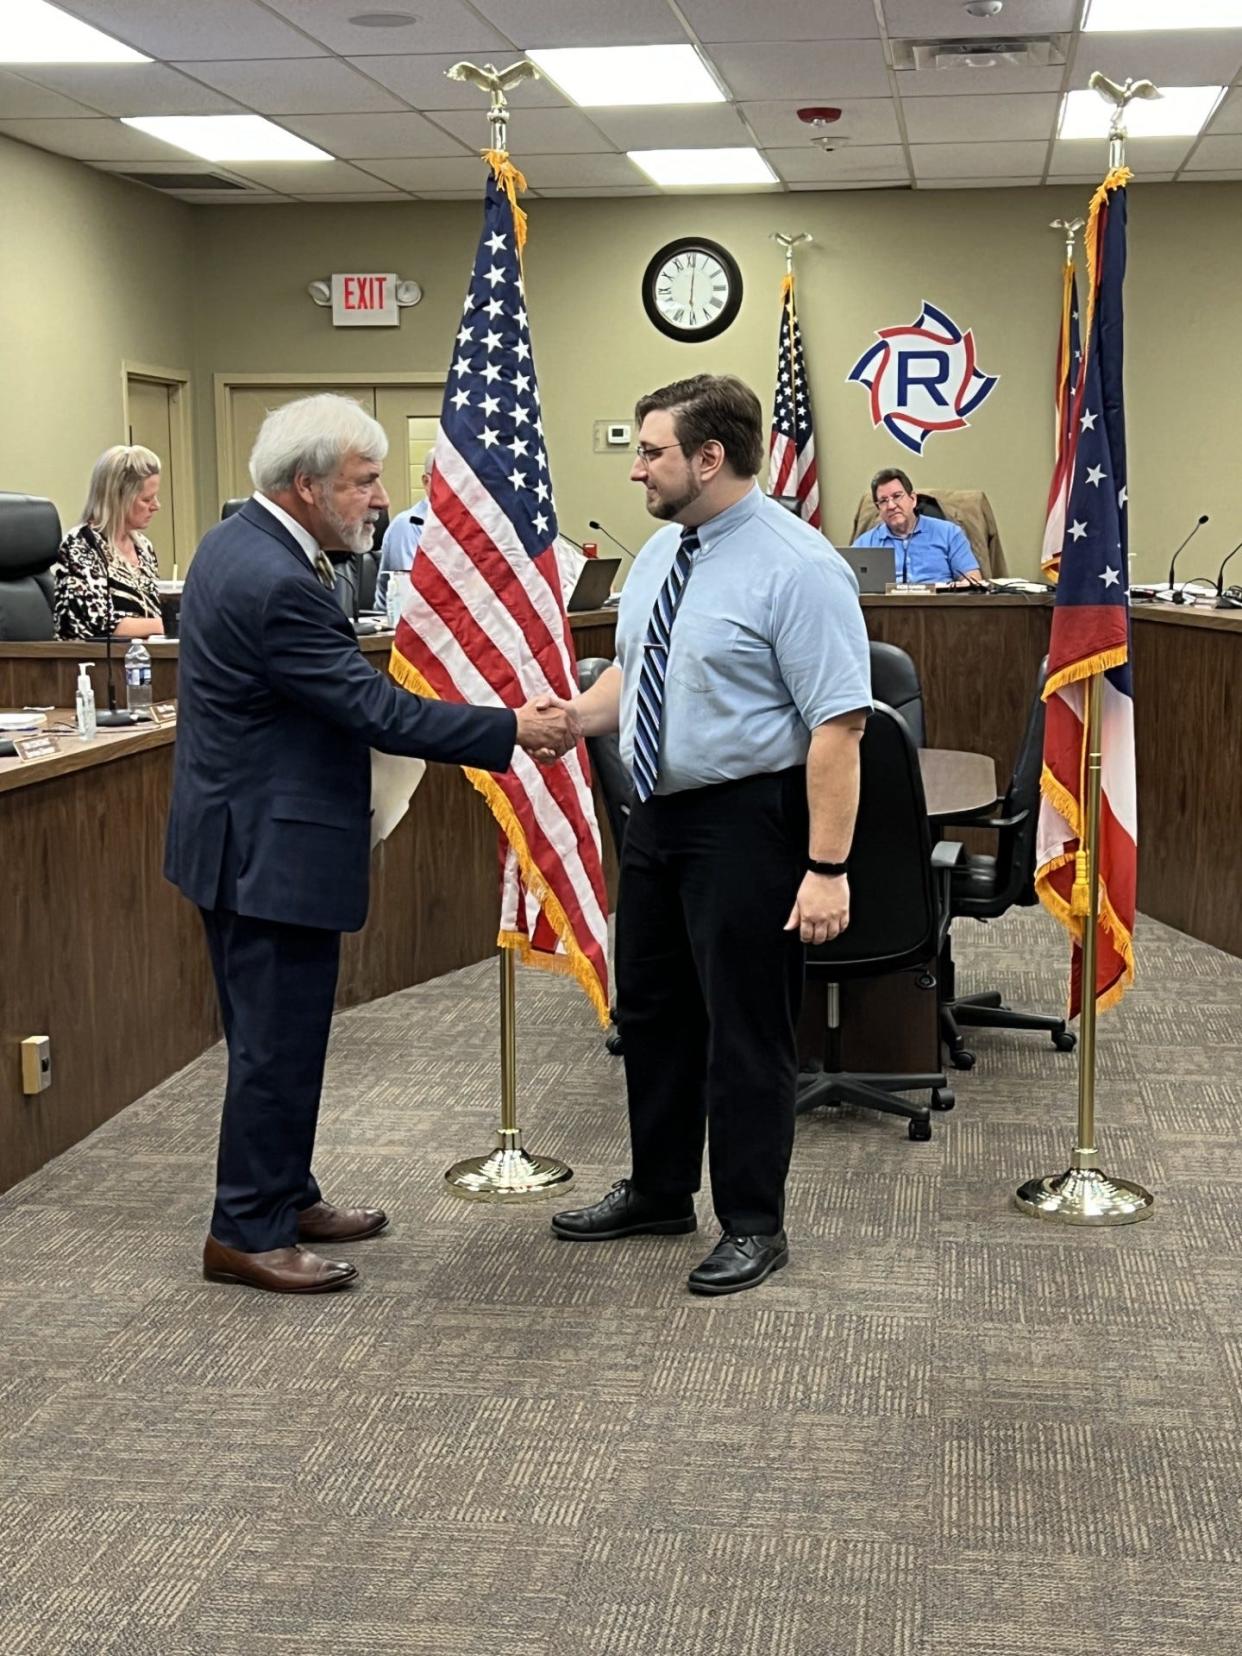 Ravenna Law Director Frank Cimino administers the oath of office to Tyler Marovich, who was recently elected to serve Ward 2.